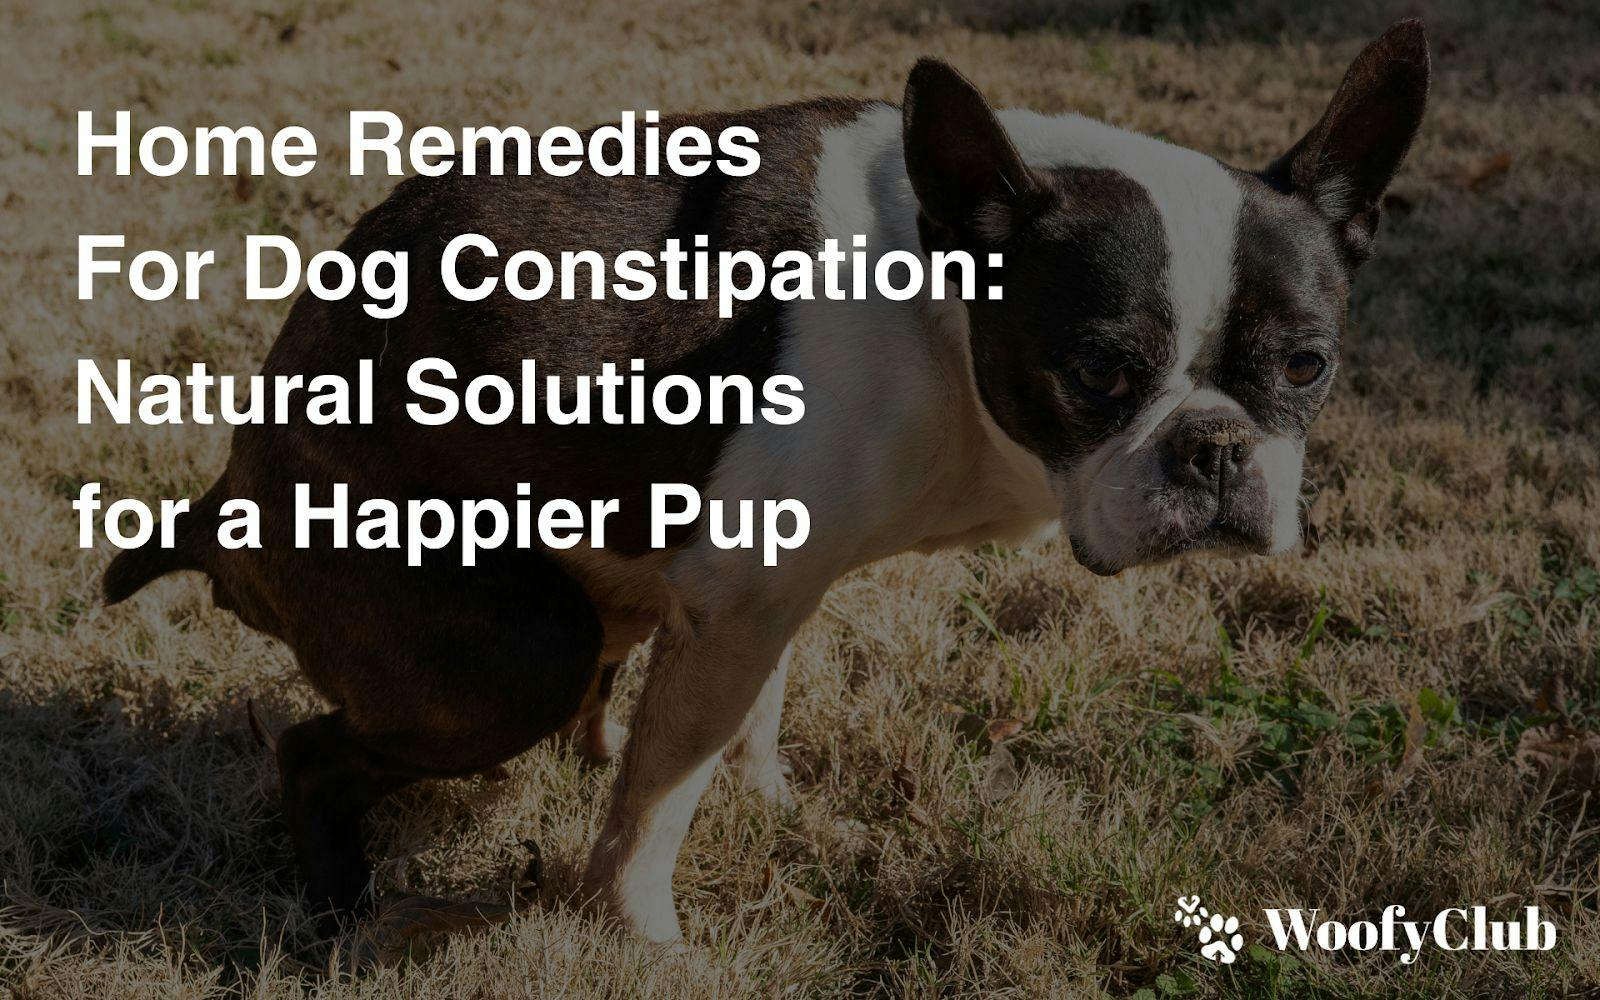 Home Remedies For Dog Constipation: Natural Solutions For A Happier Pup